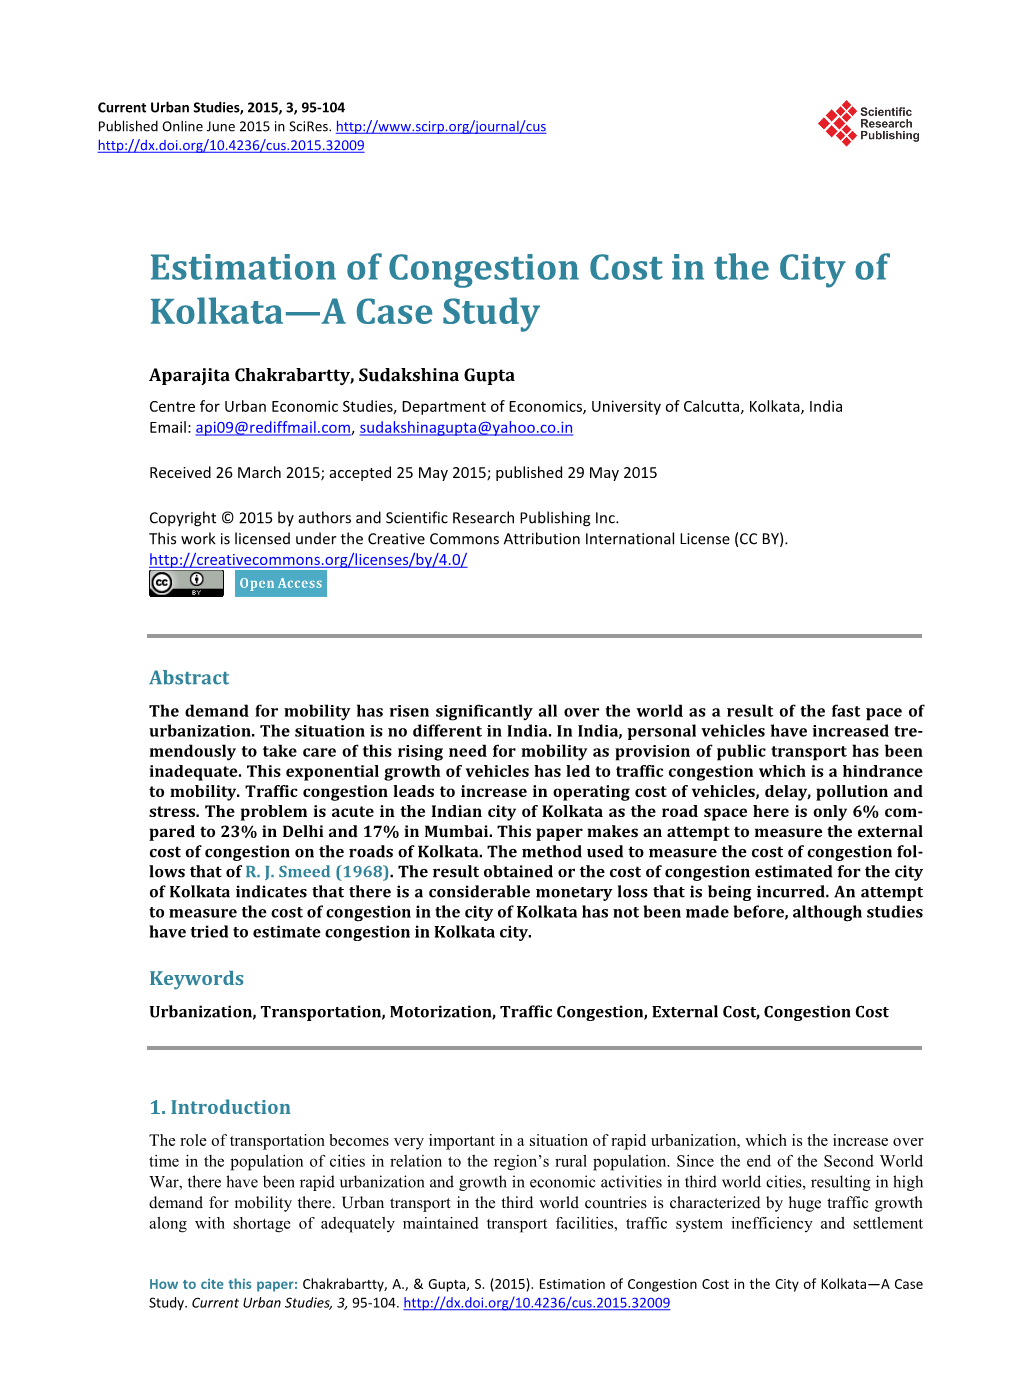 Estimation of Congestion Cost in the City of Kolkata—A Case Study